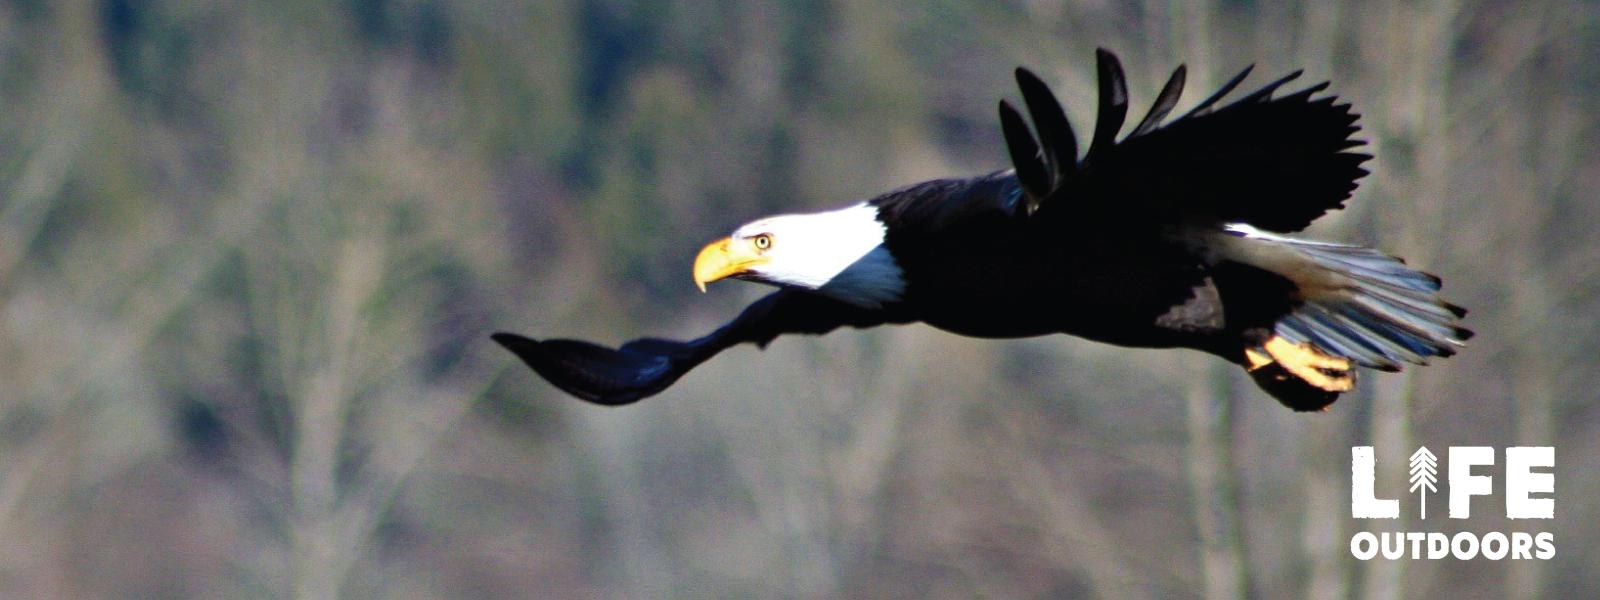 A bald eagle takes flight in the Skagit River Valley.